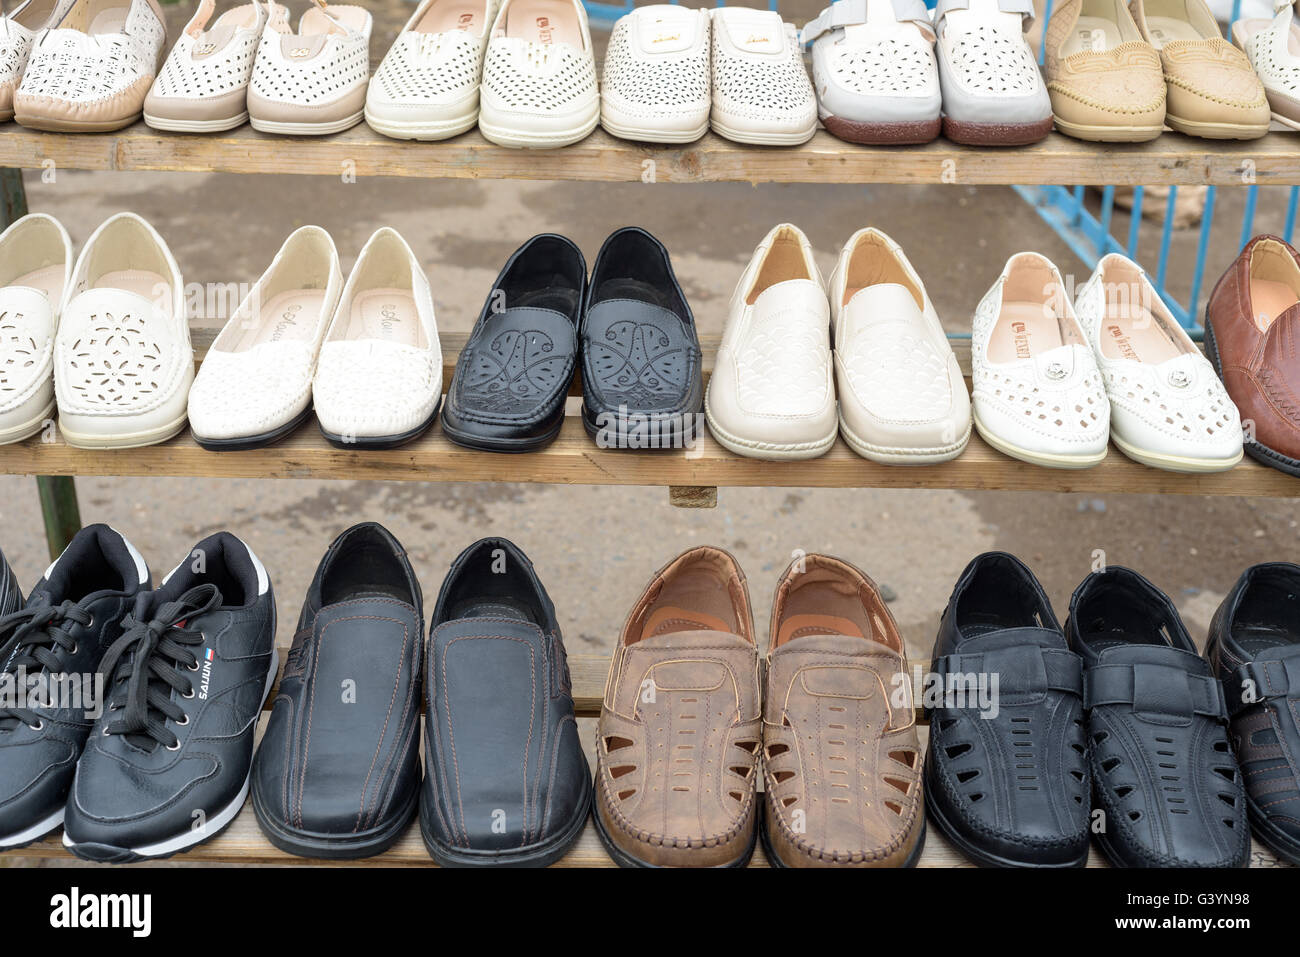 Rows of Shoes for Sale at a Market Stall Stock Photo